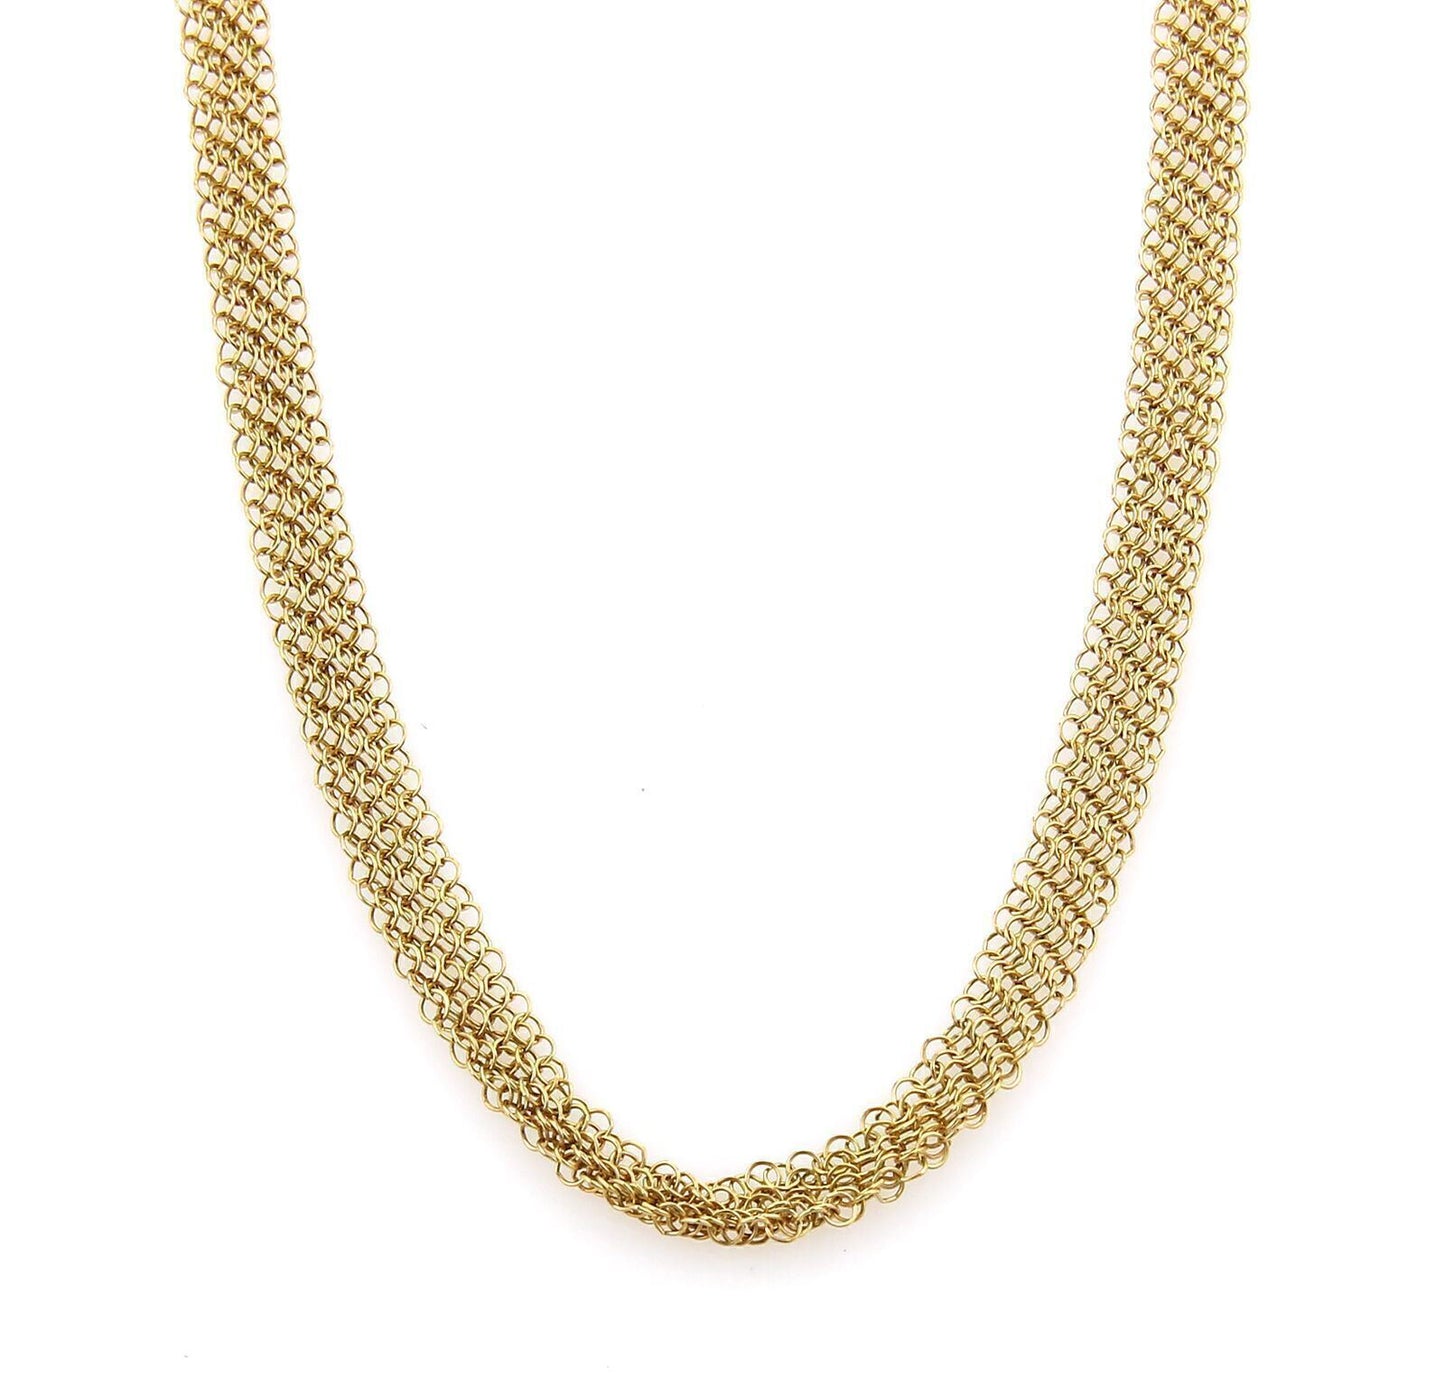 Tiffany & Co. Peretti 18k Yellow Gold 6mm Wide Mesh Chain Necklace 30" Long | Necklaces | catalog, Chains, Designer Jewelry, Necklaces, Tiffany & Co. | Tiffany & Co.